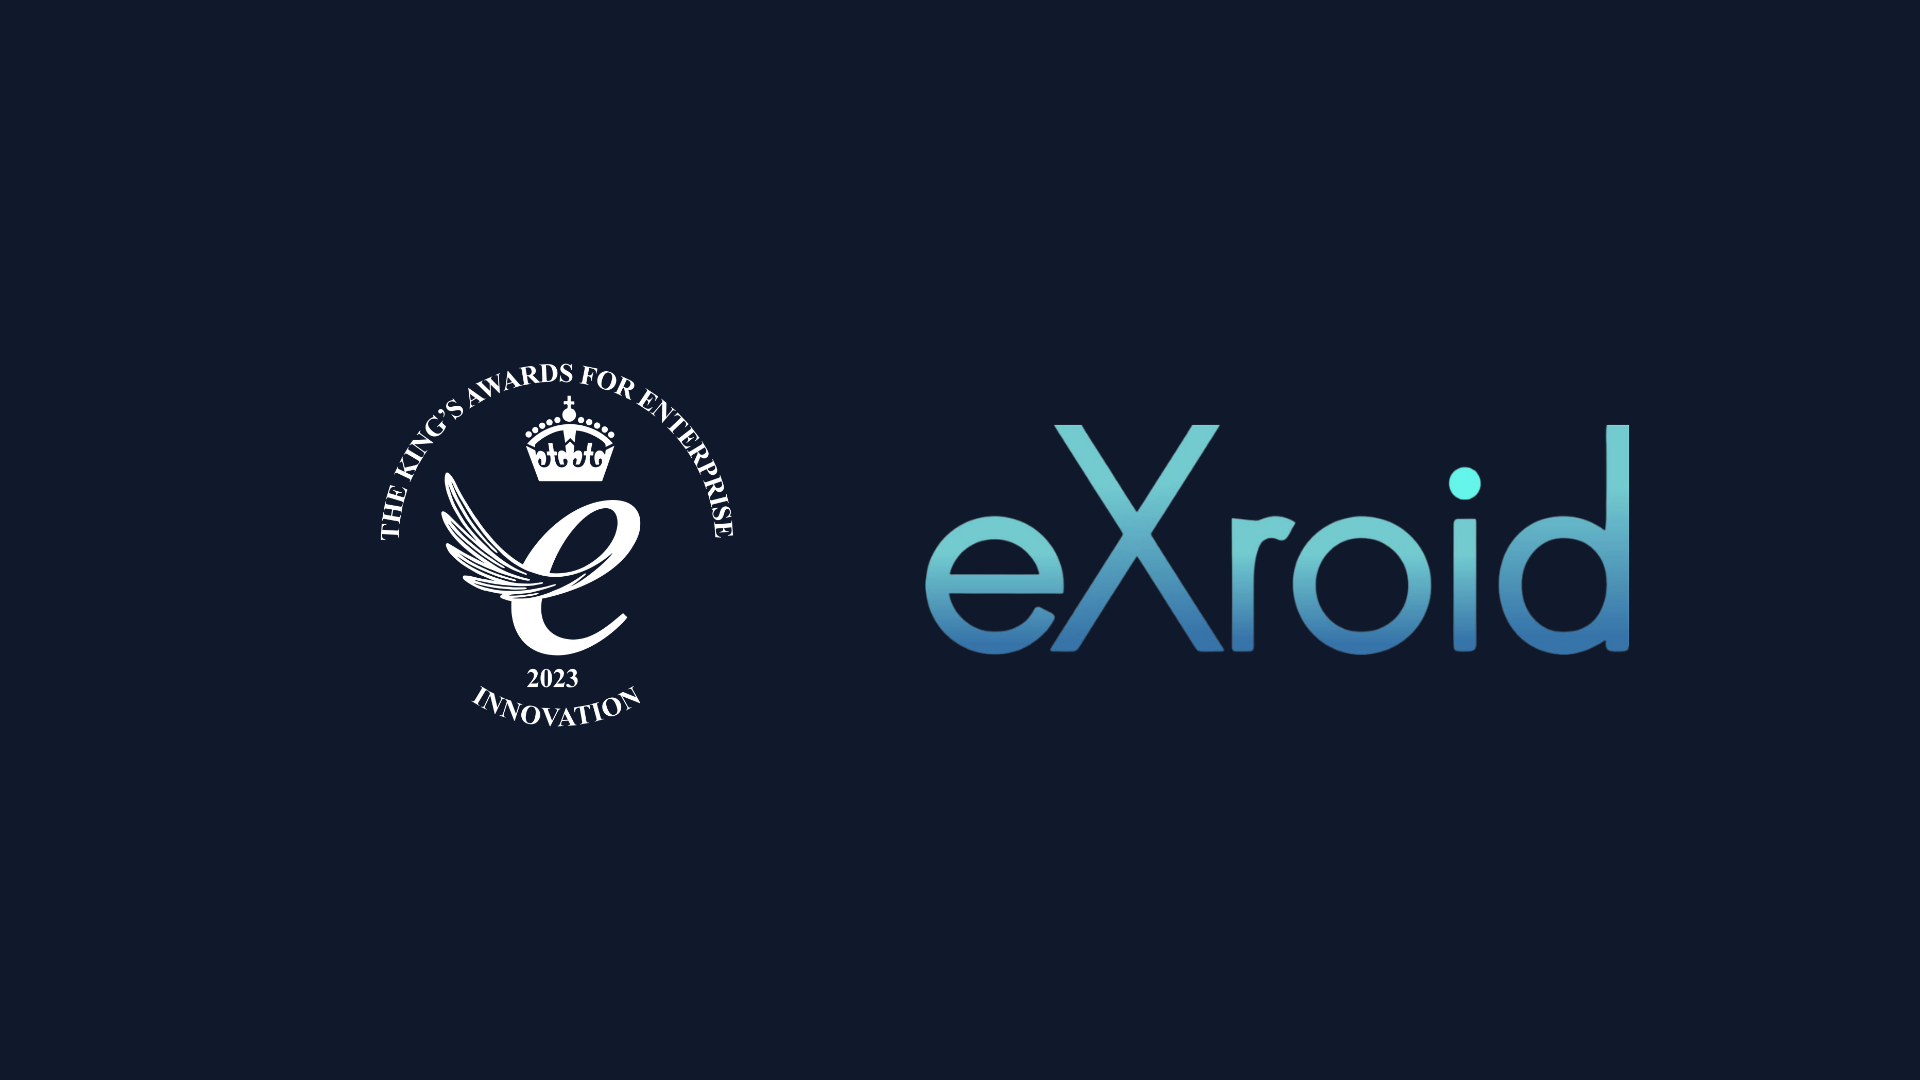 eXroid Recieves Royal Recognition As One of the Country’s Top Innovative Businesses